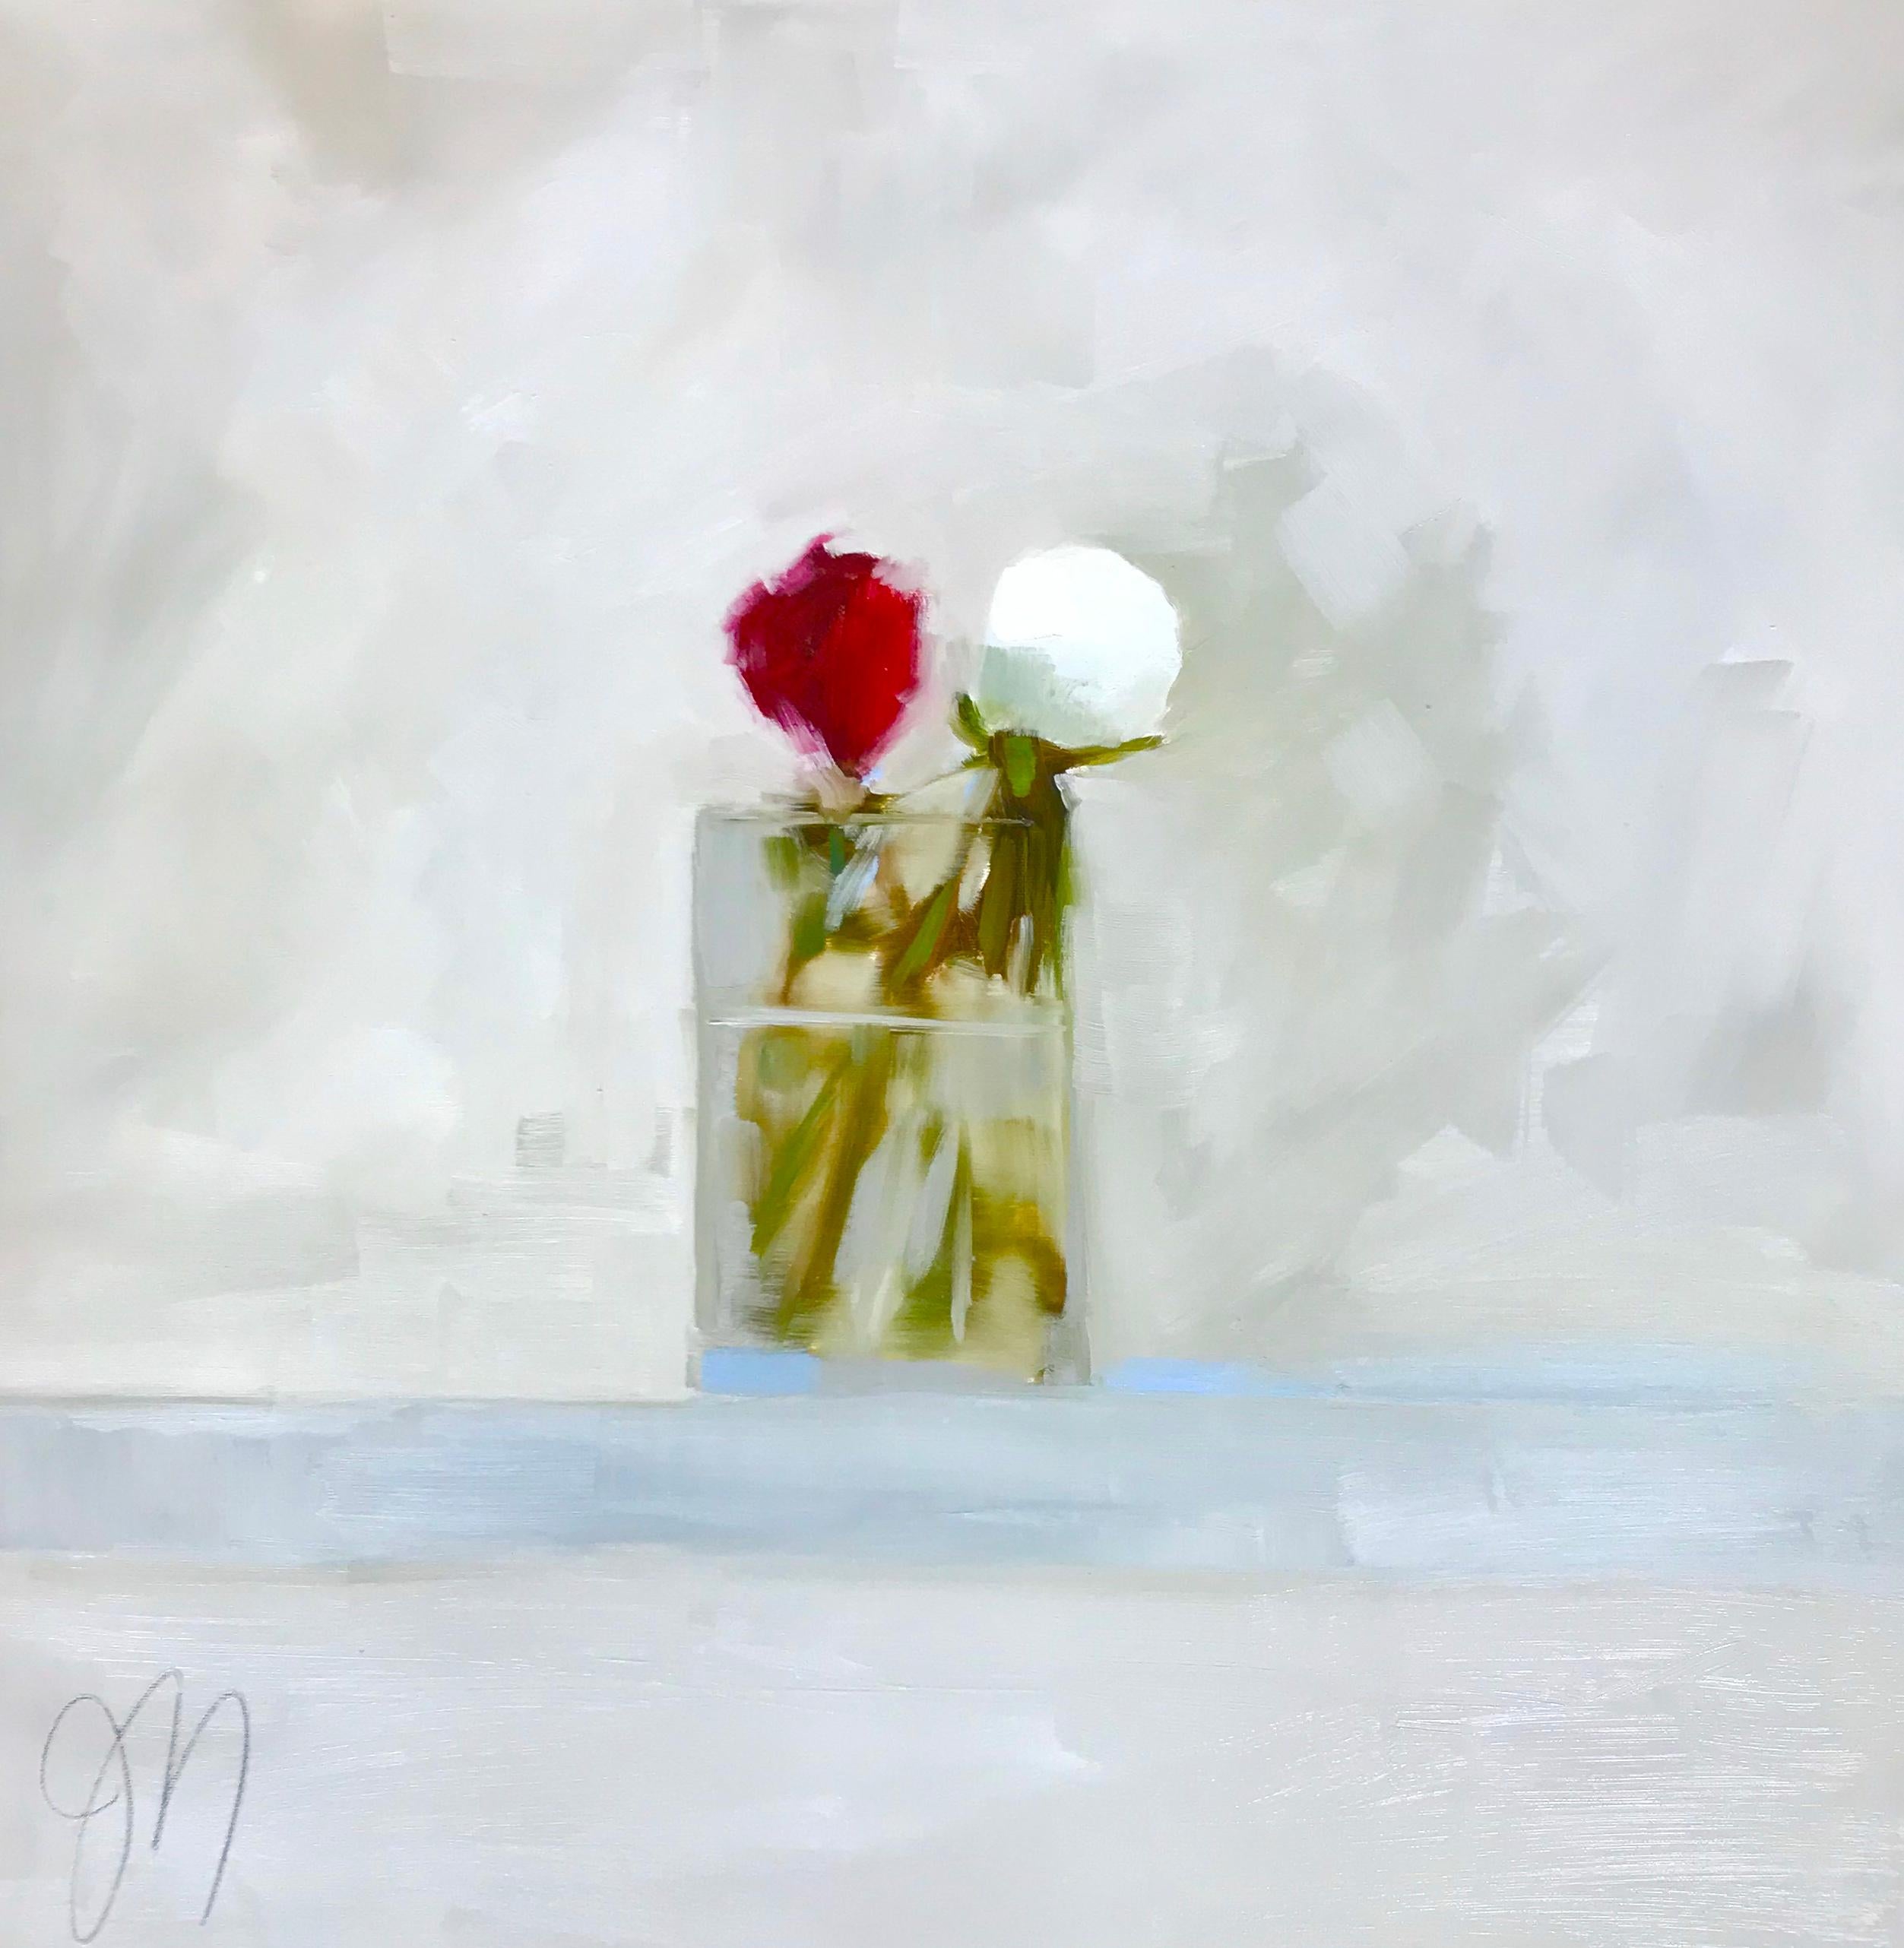 "Two Peony Bud" Impressionist style oil painting of white and red peonies